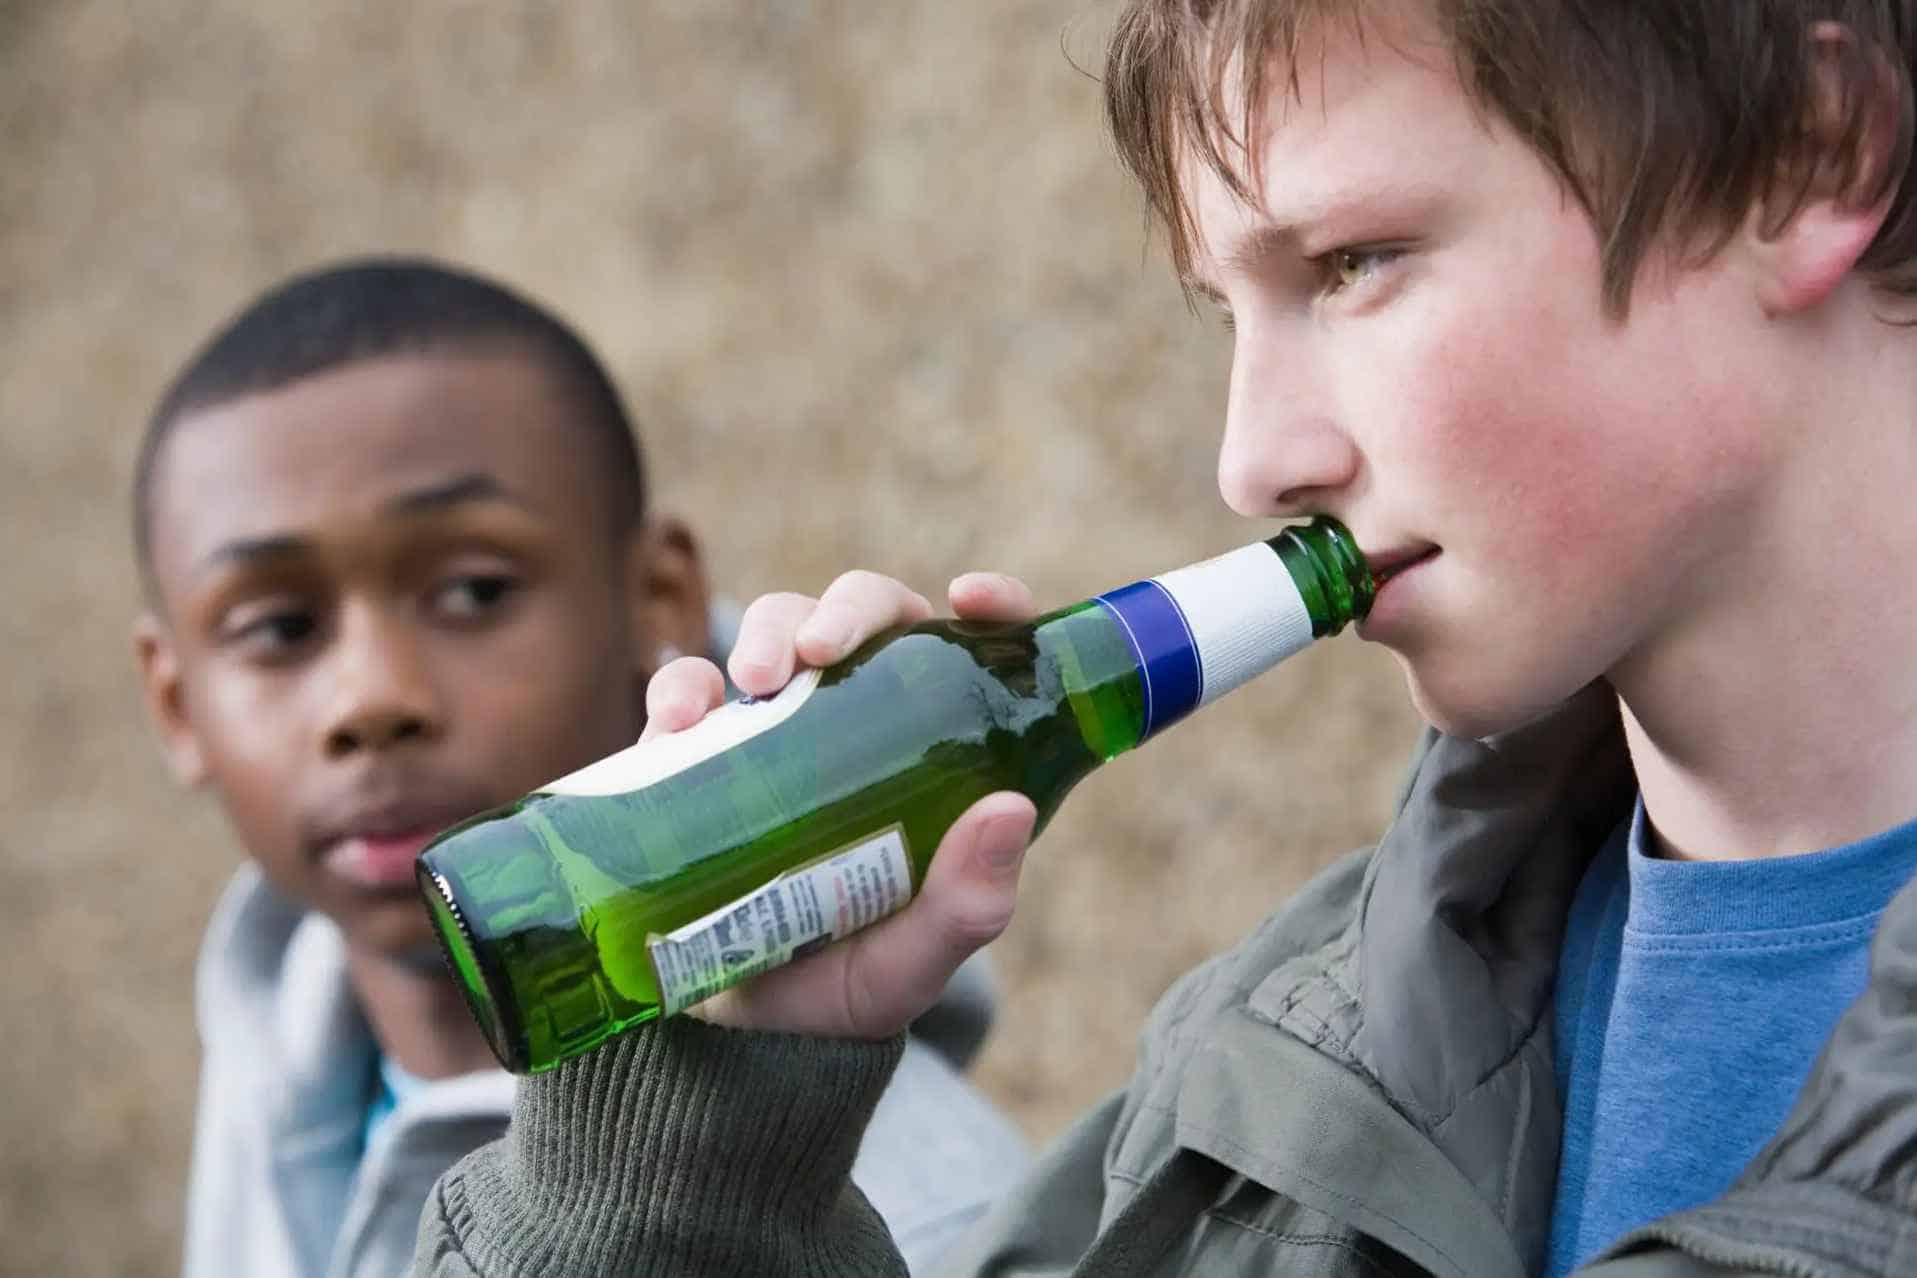 Can Minors Legally Drink Non-alcoholic Beer